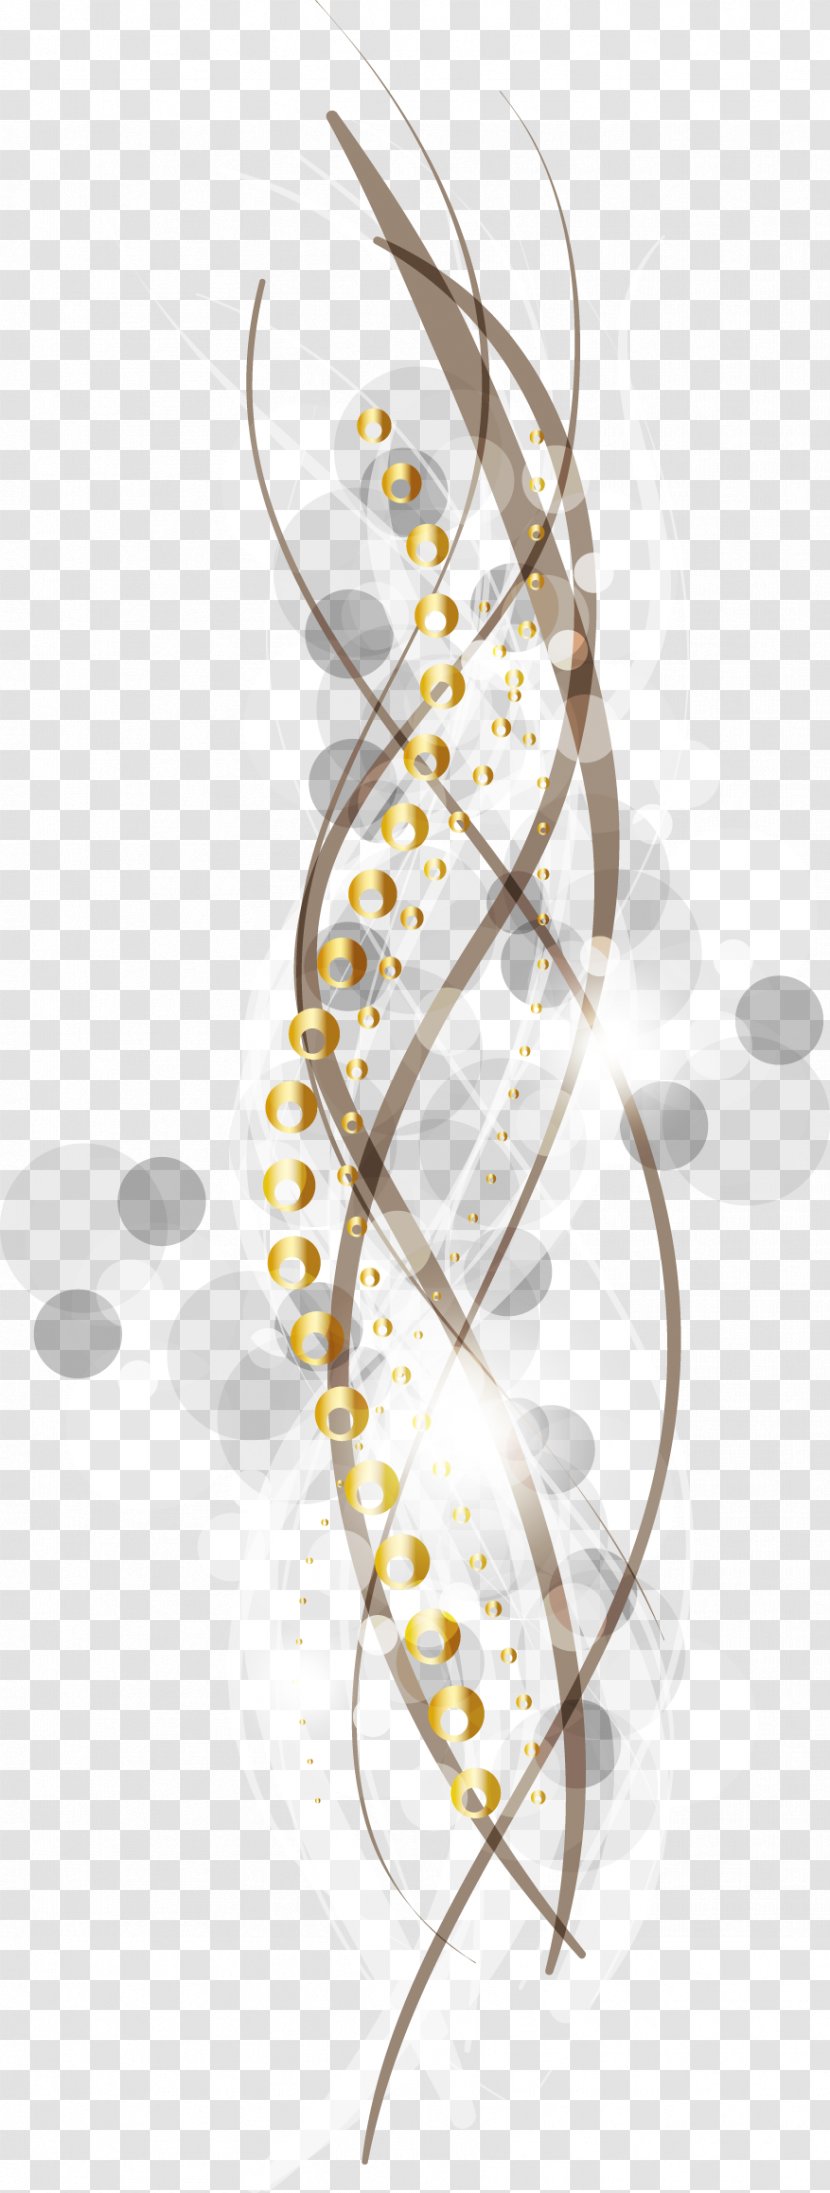 Surrounded By Golden Curly Lines - Gimp - Photoscape Transparent PNG